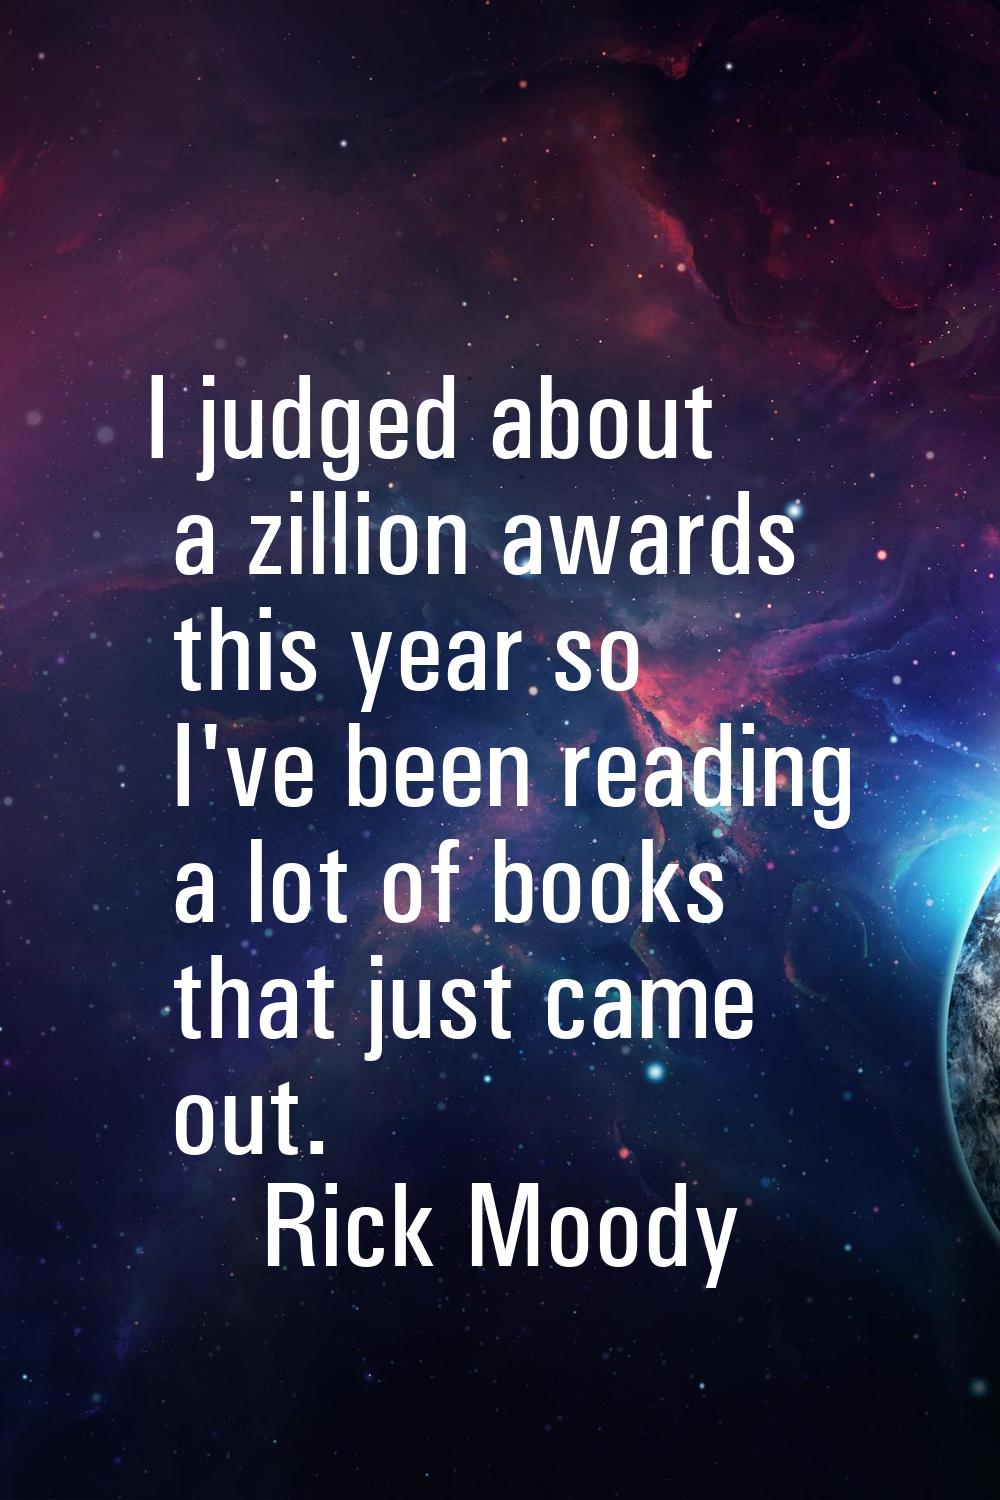 I judged about a zillion awards this year so I've been reading a lot of books that just came out.